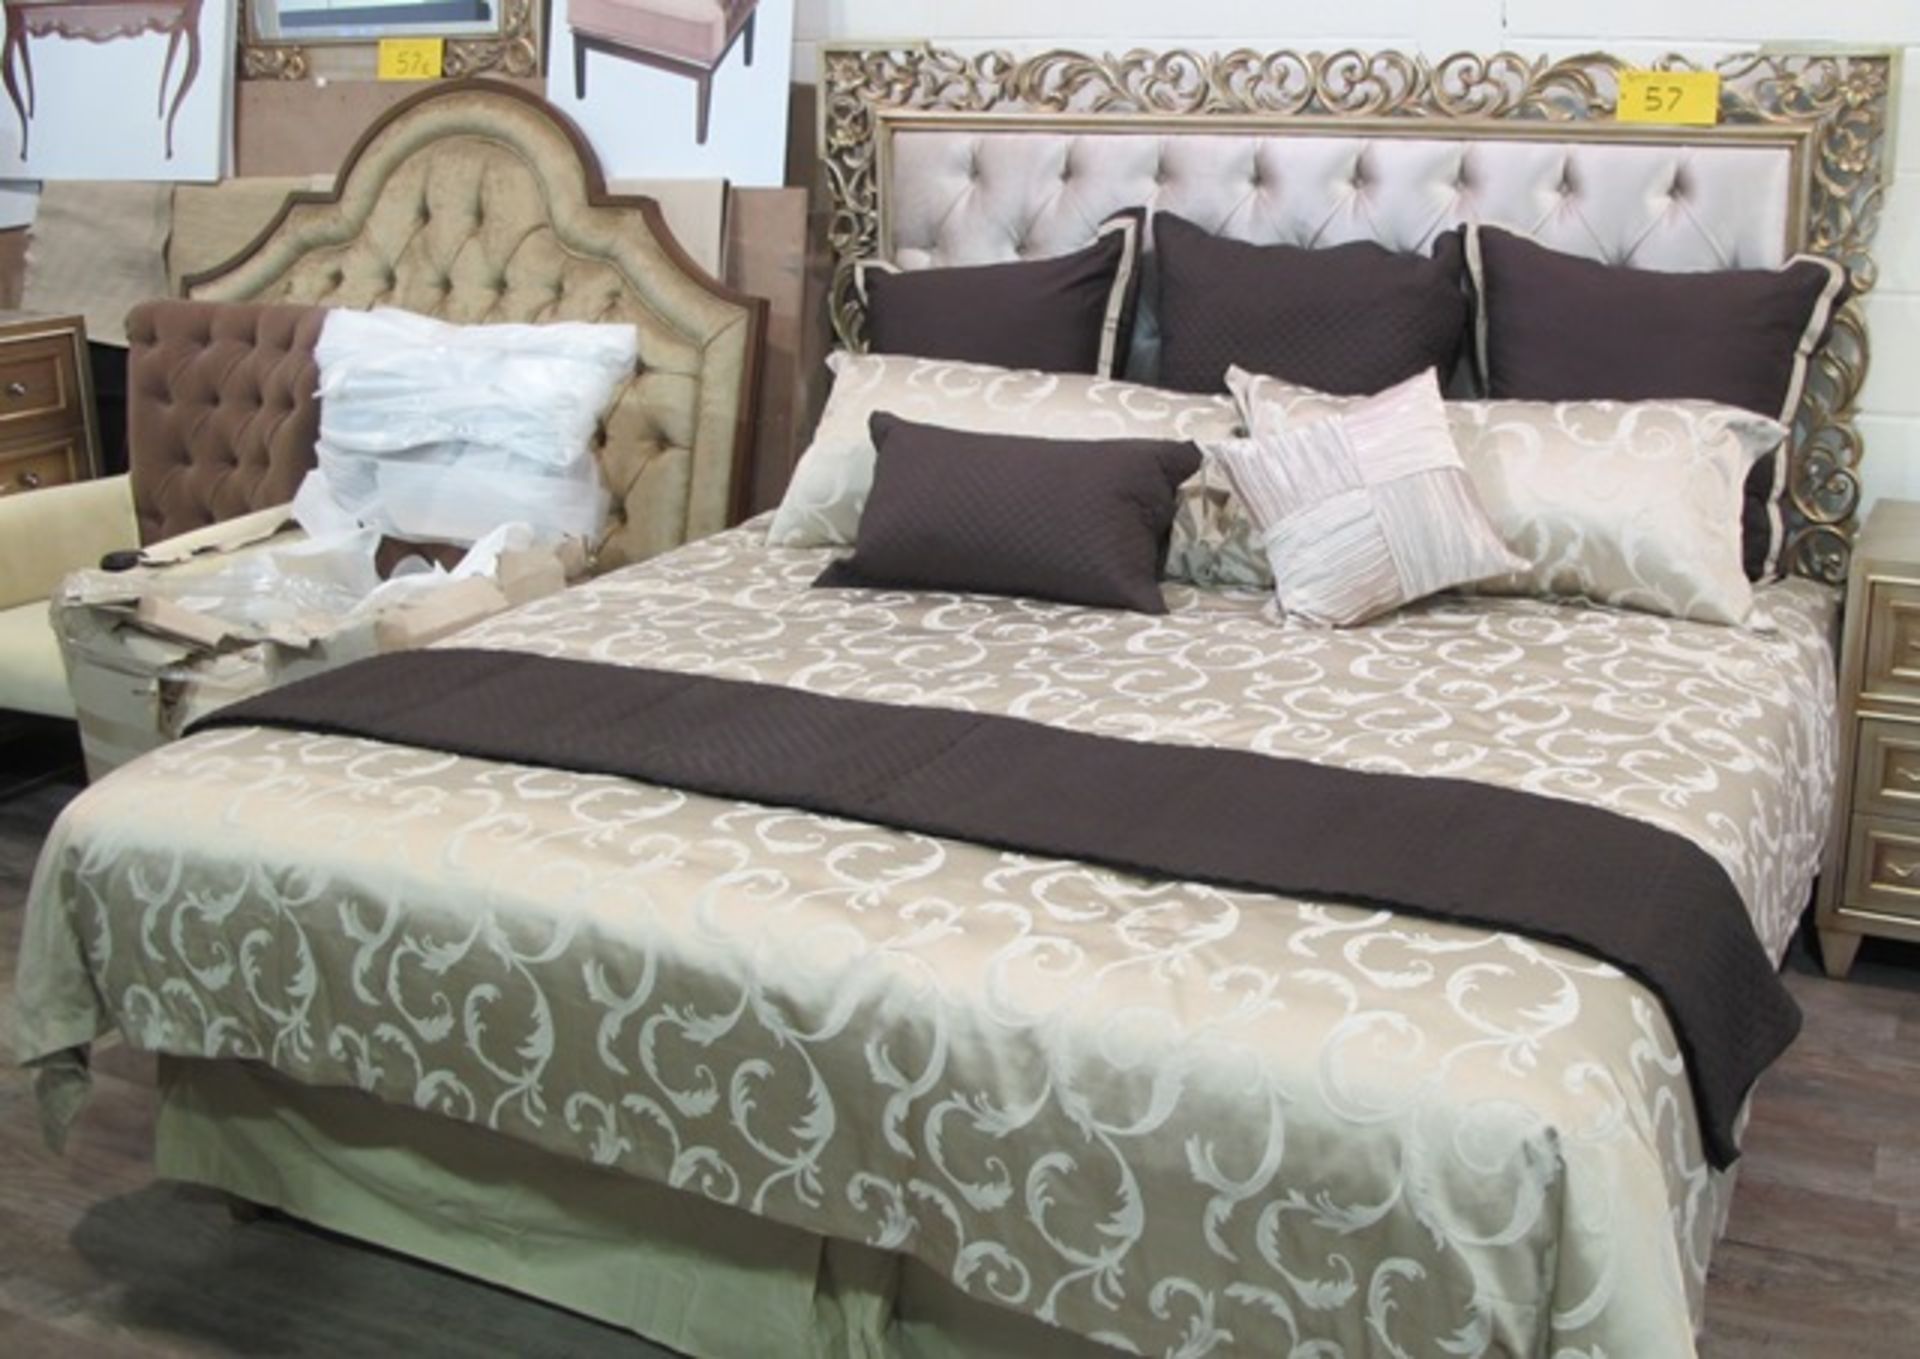 MARSELLE KING SIZE BED, MSRP $8,500 (HEADBOARD & FRAME ONLY)